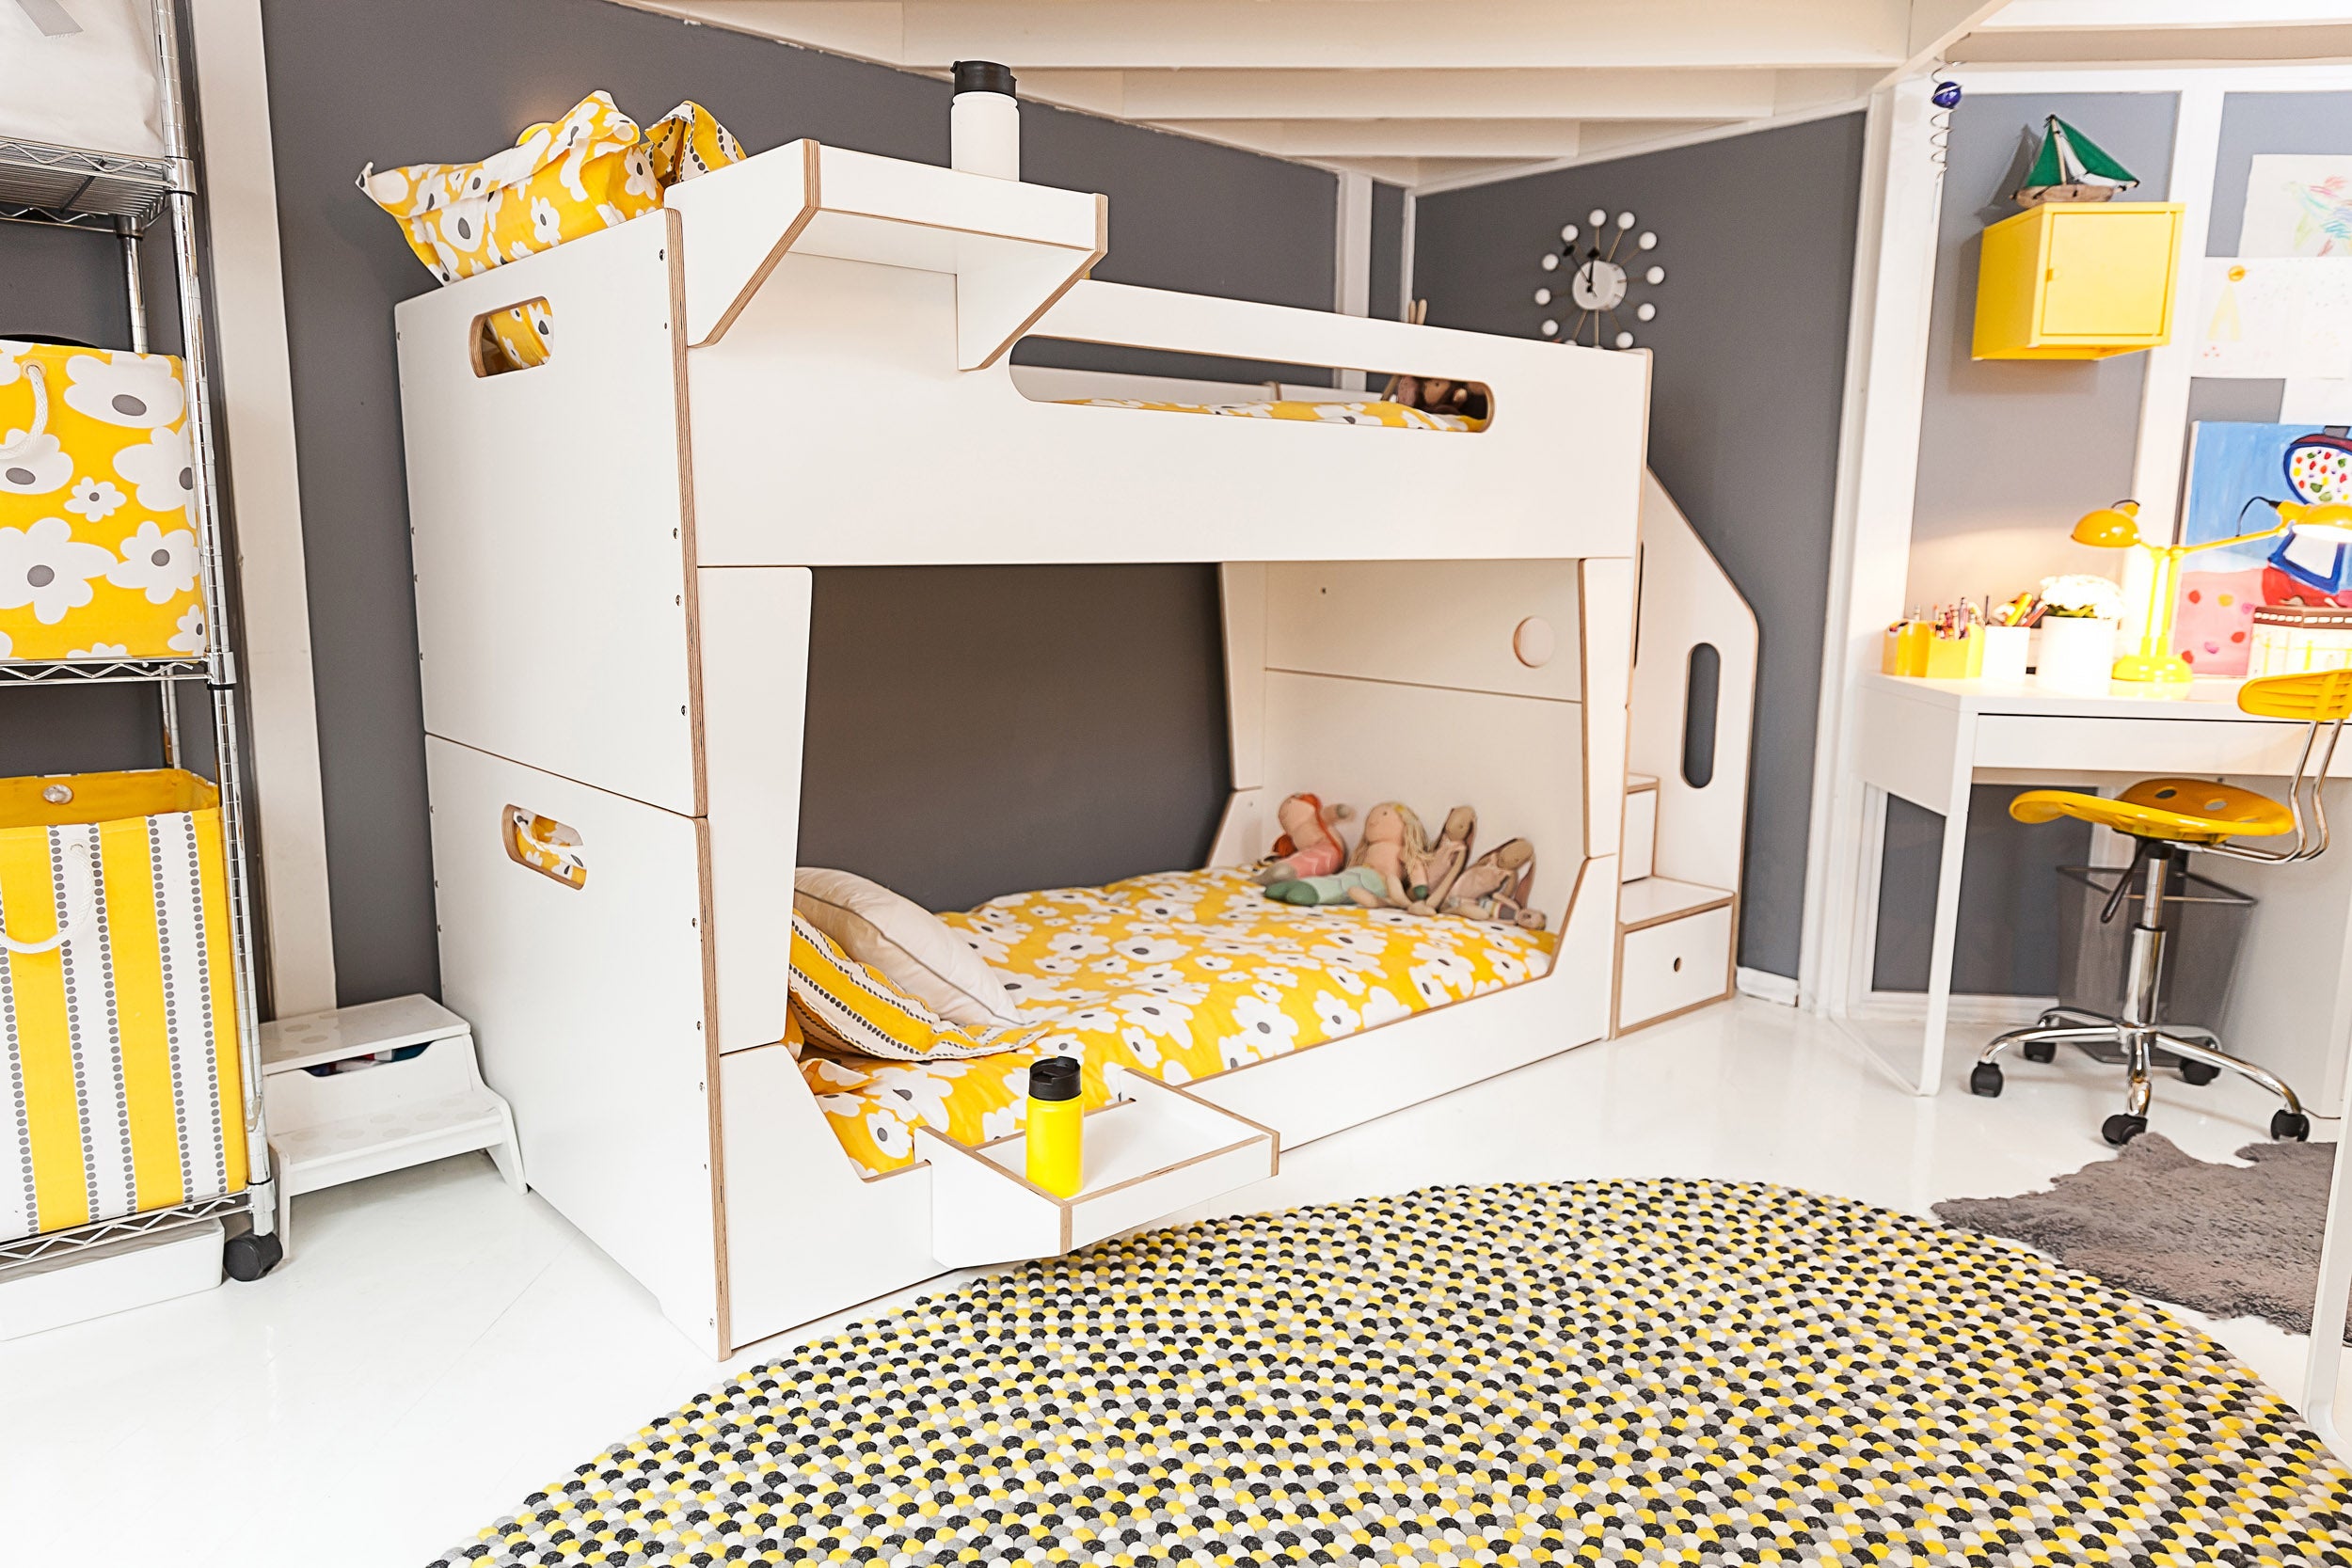 Modern children’s room, white bunk bed, yellow accents, polka dot rug.